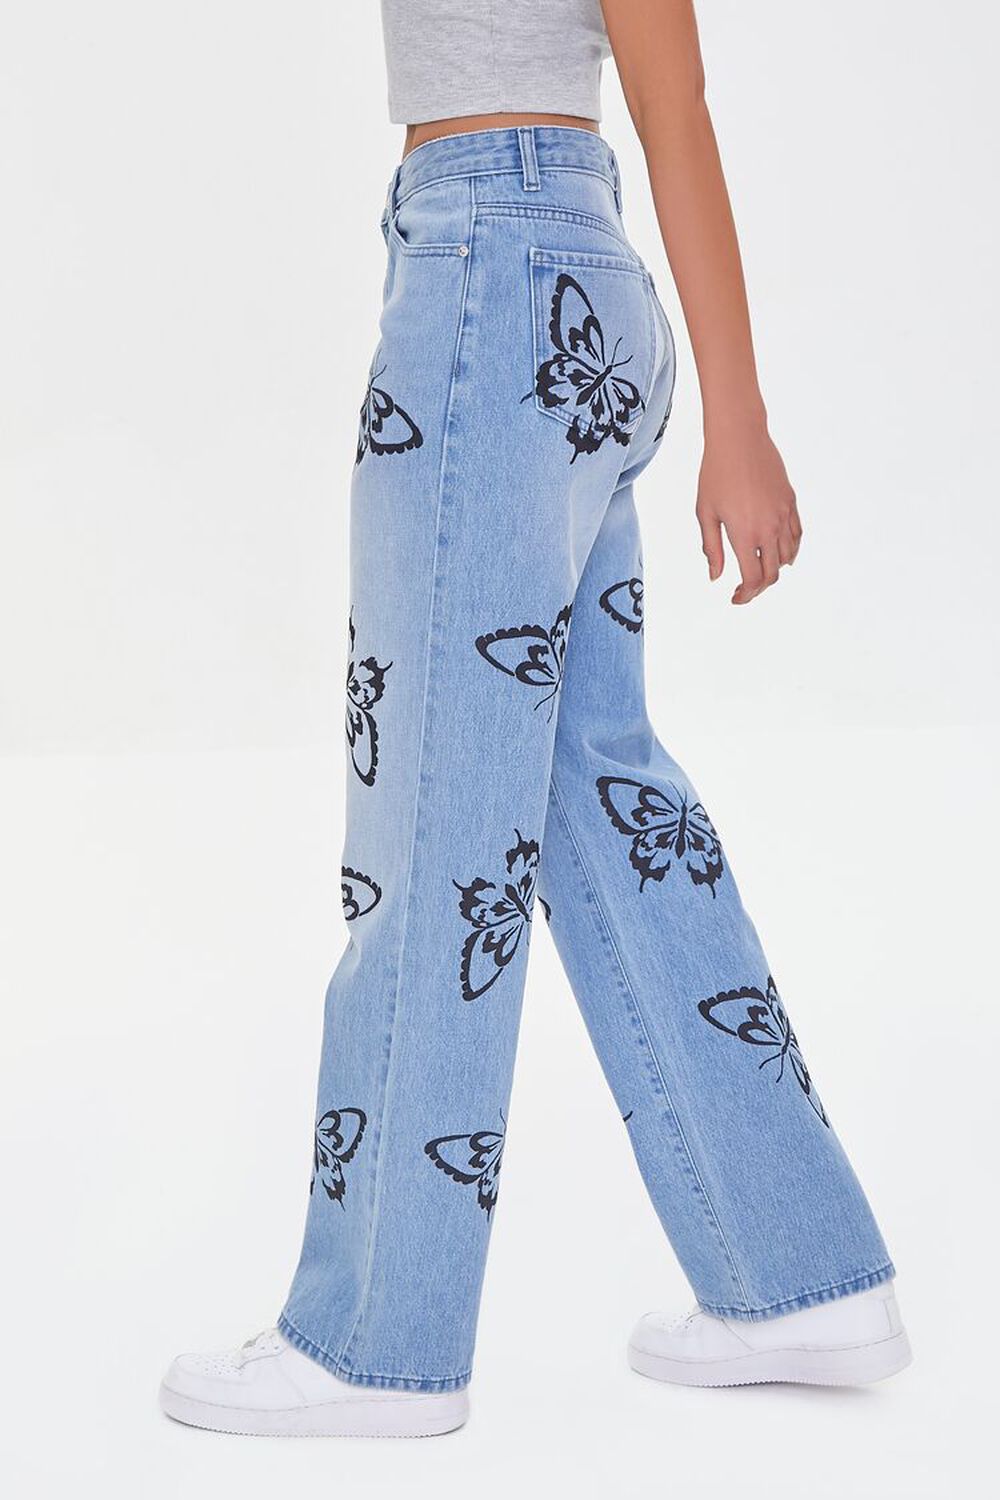 Butterfly Graphic Jeans